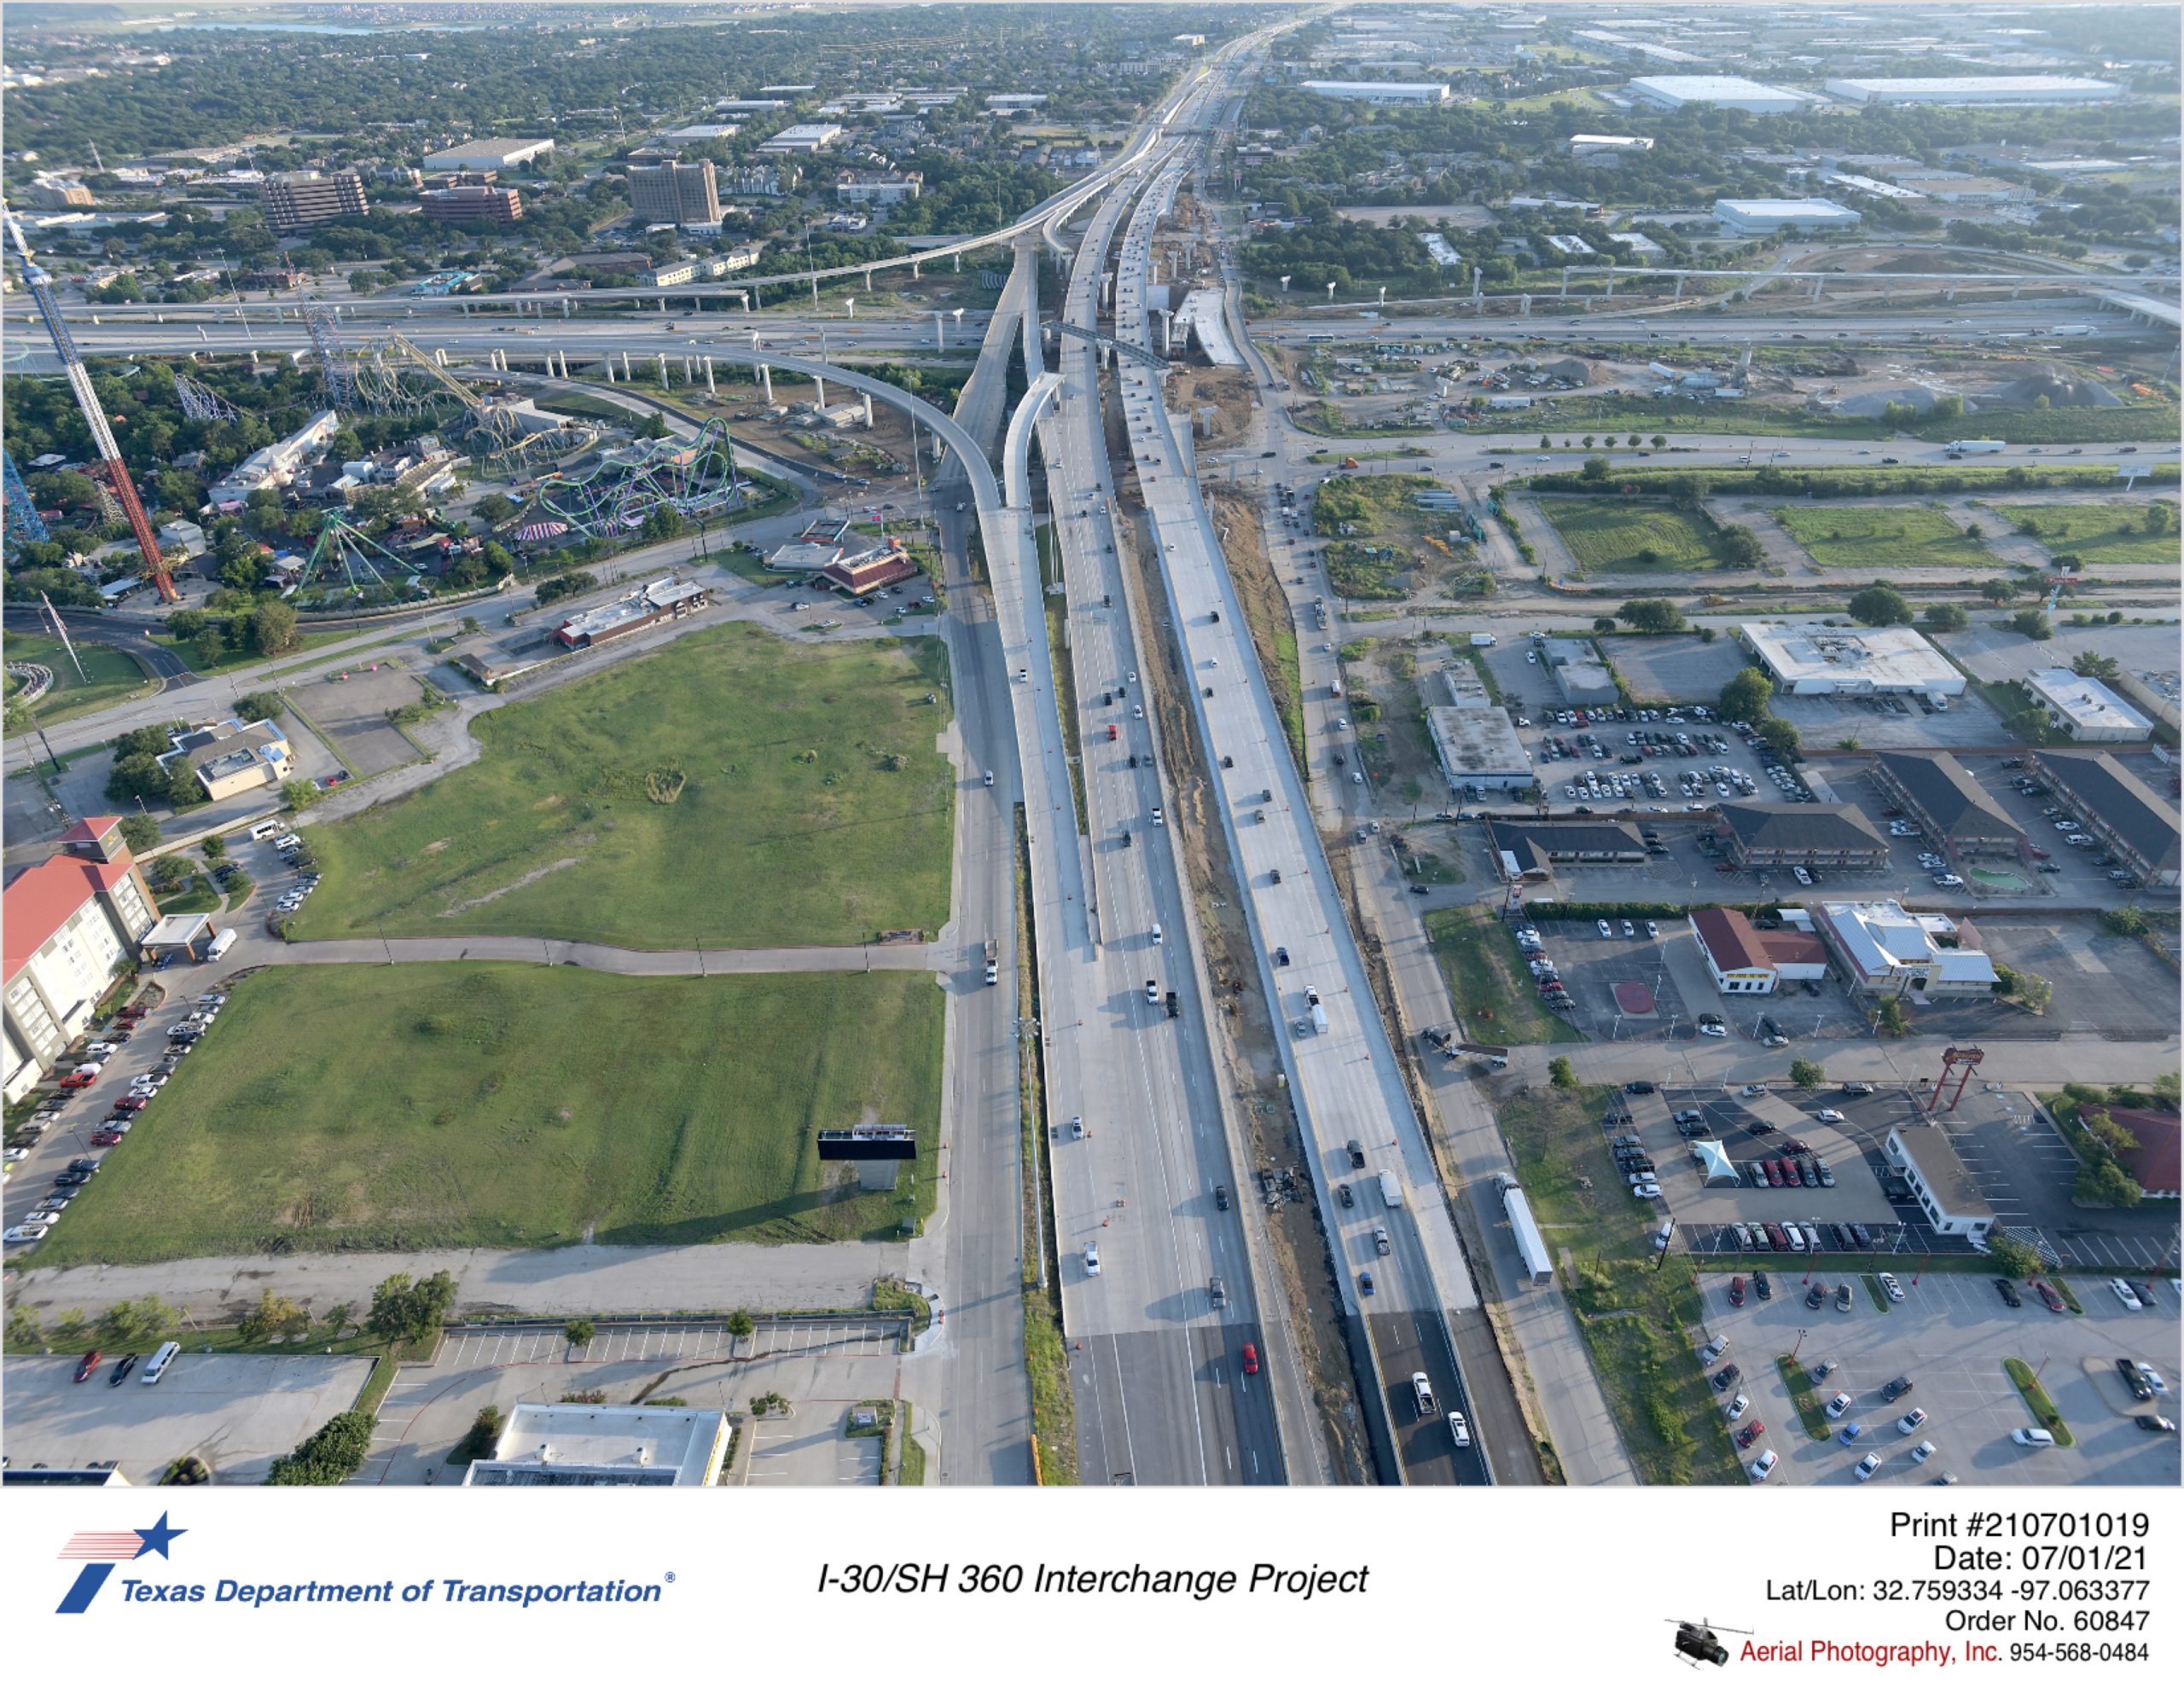 SH 360 looking north at I-30 interchange. SH 360 northbound traffic on new permanent alignment.